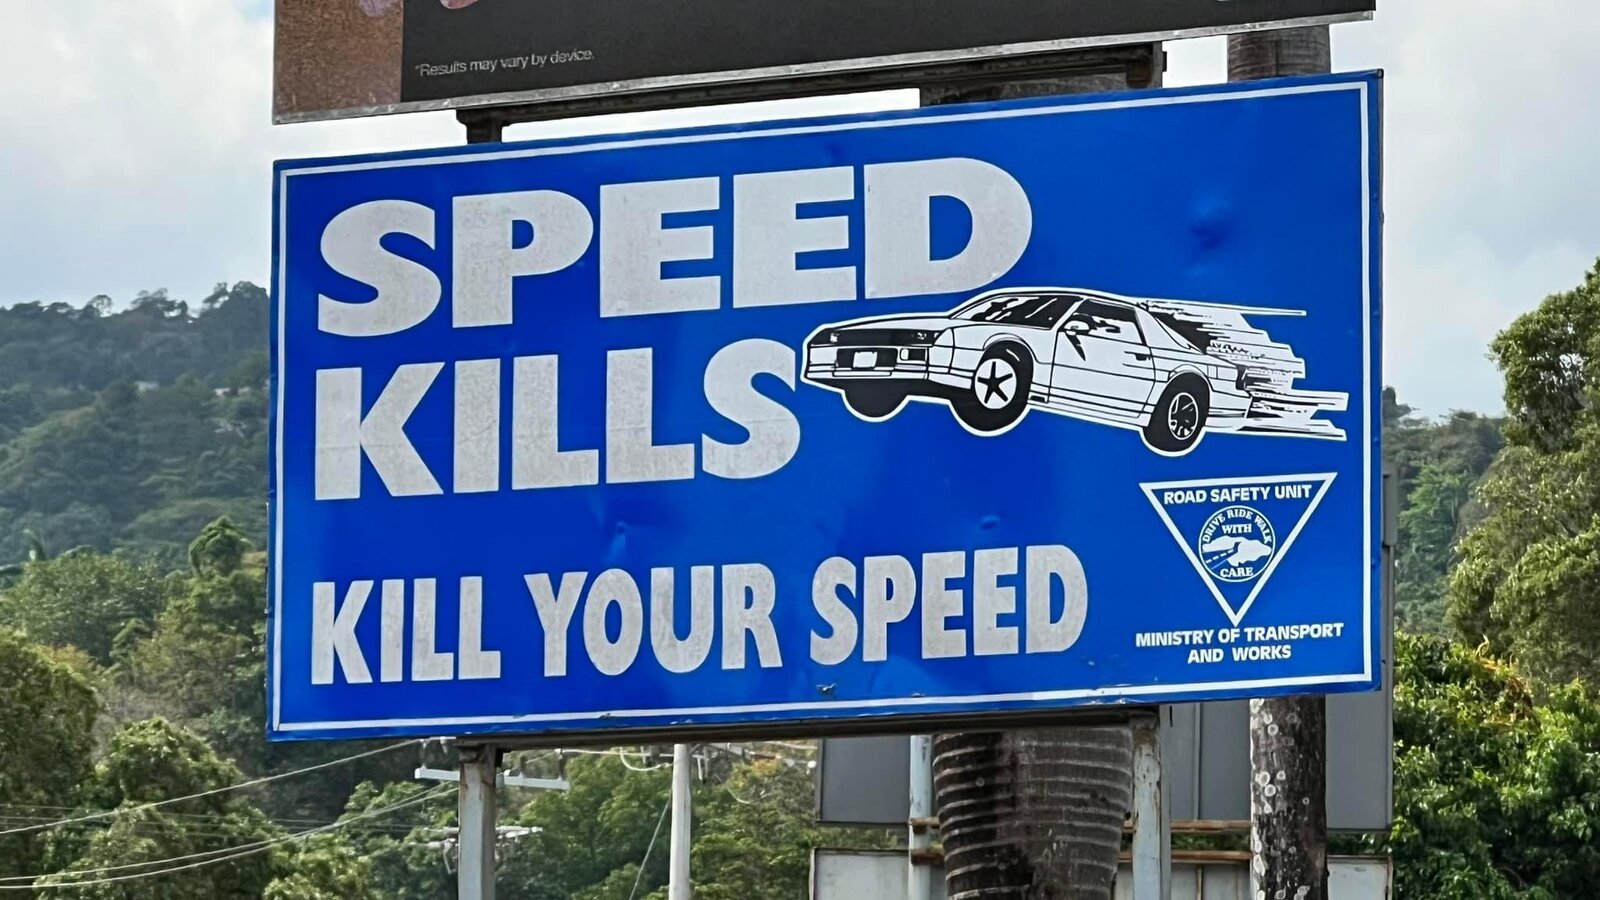 Ridiculously low speed limits